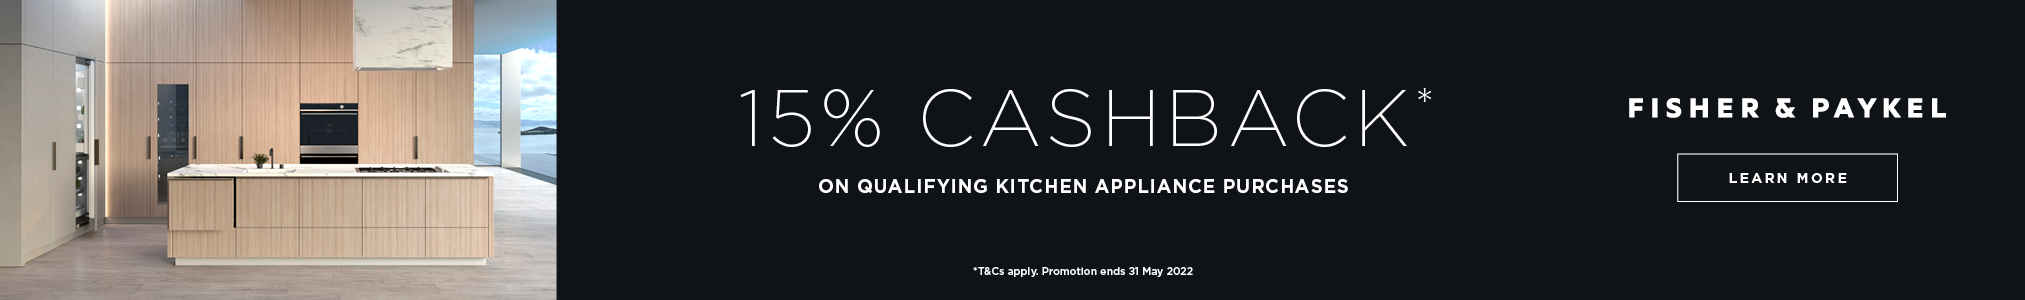 15% Cashback* On Qualifying Fisher & Paykel Kitchen Appliance Purchases